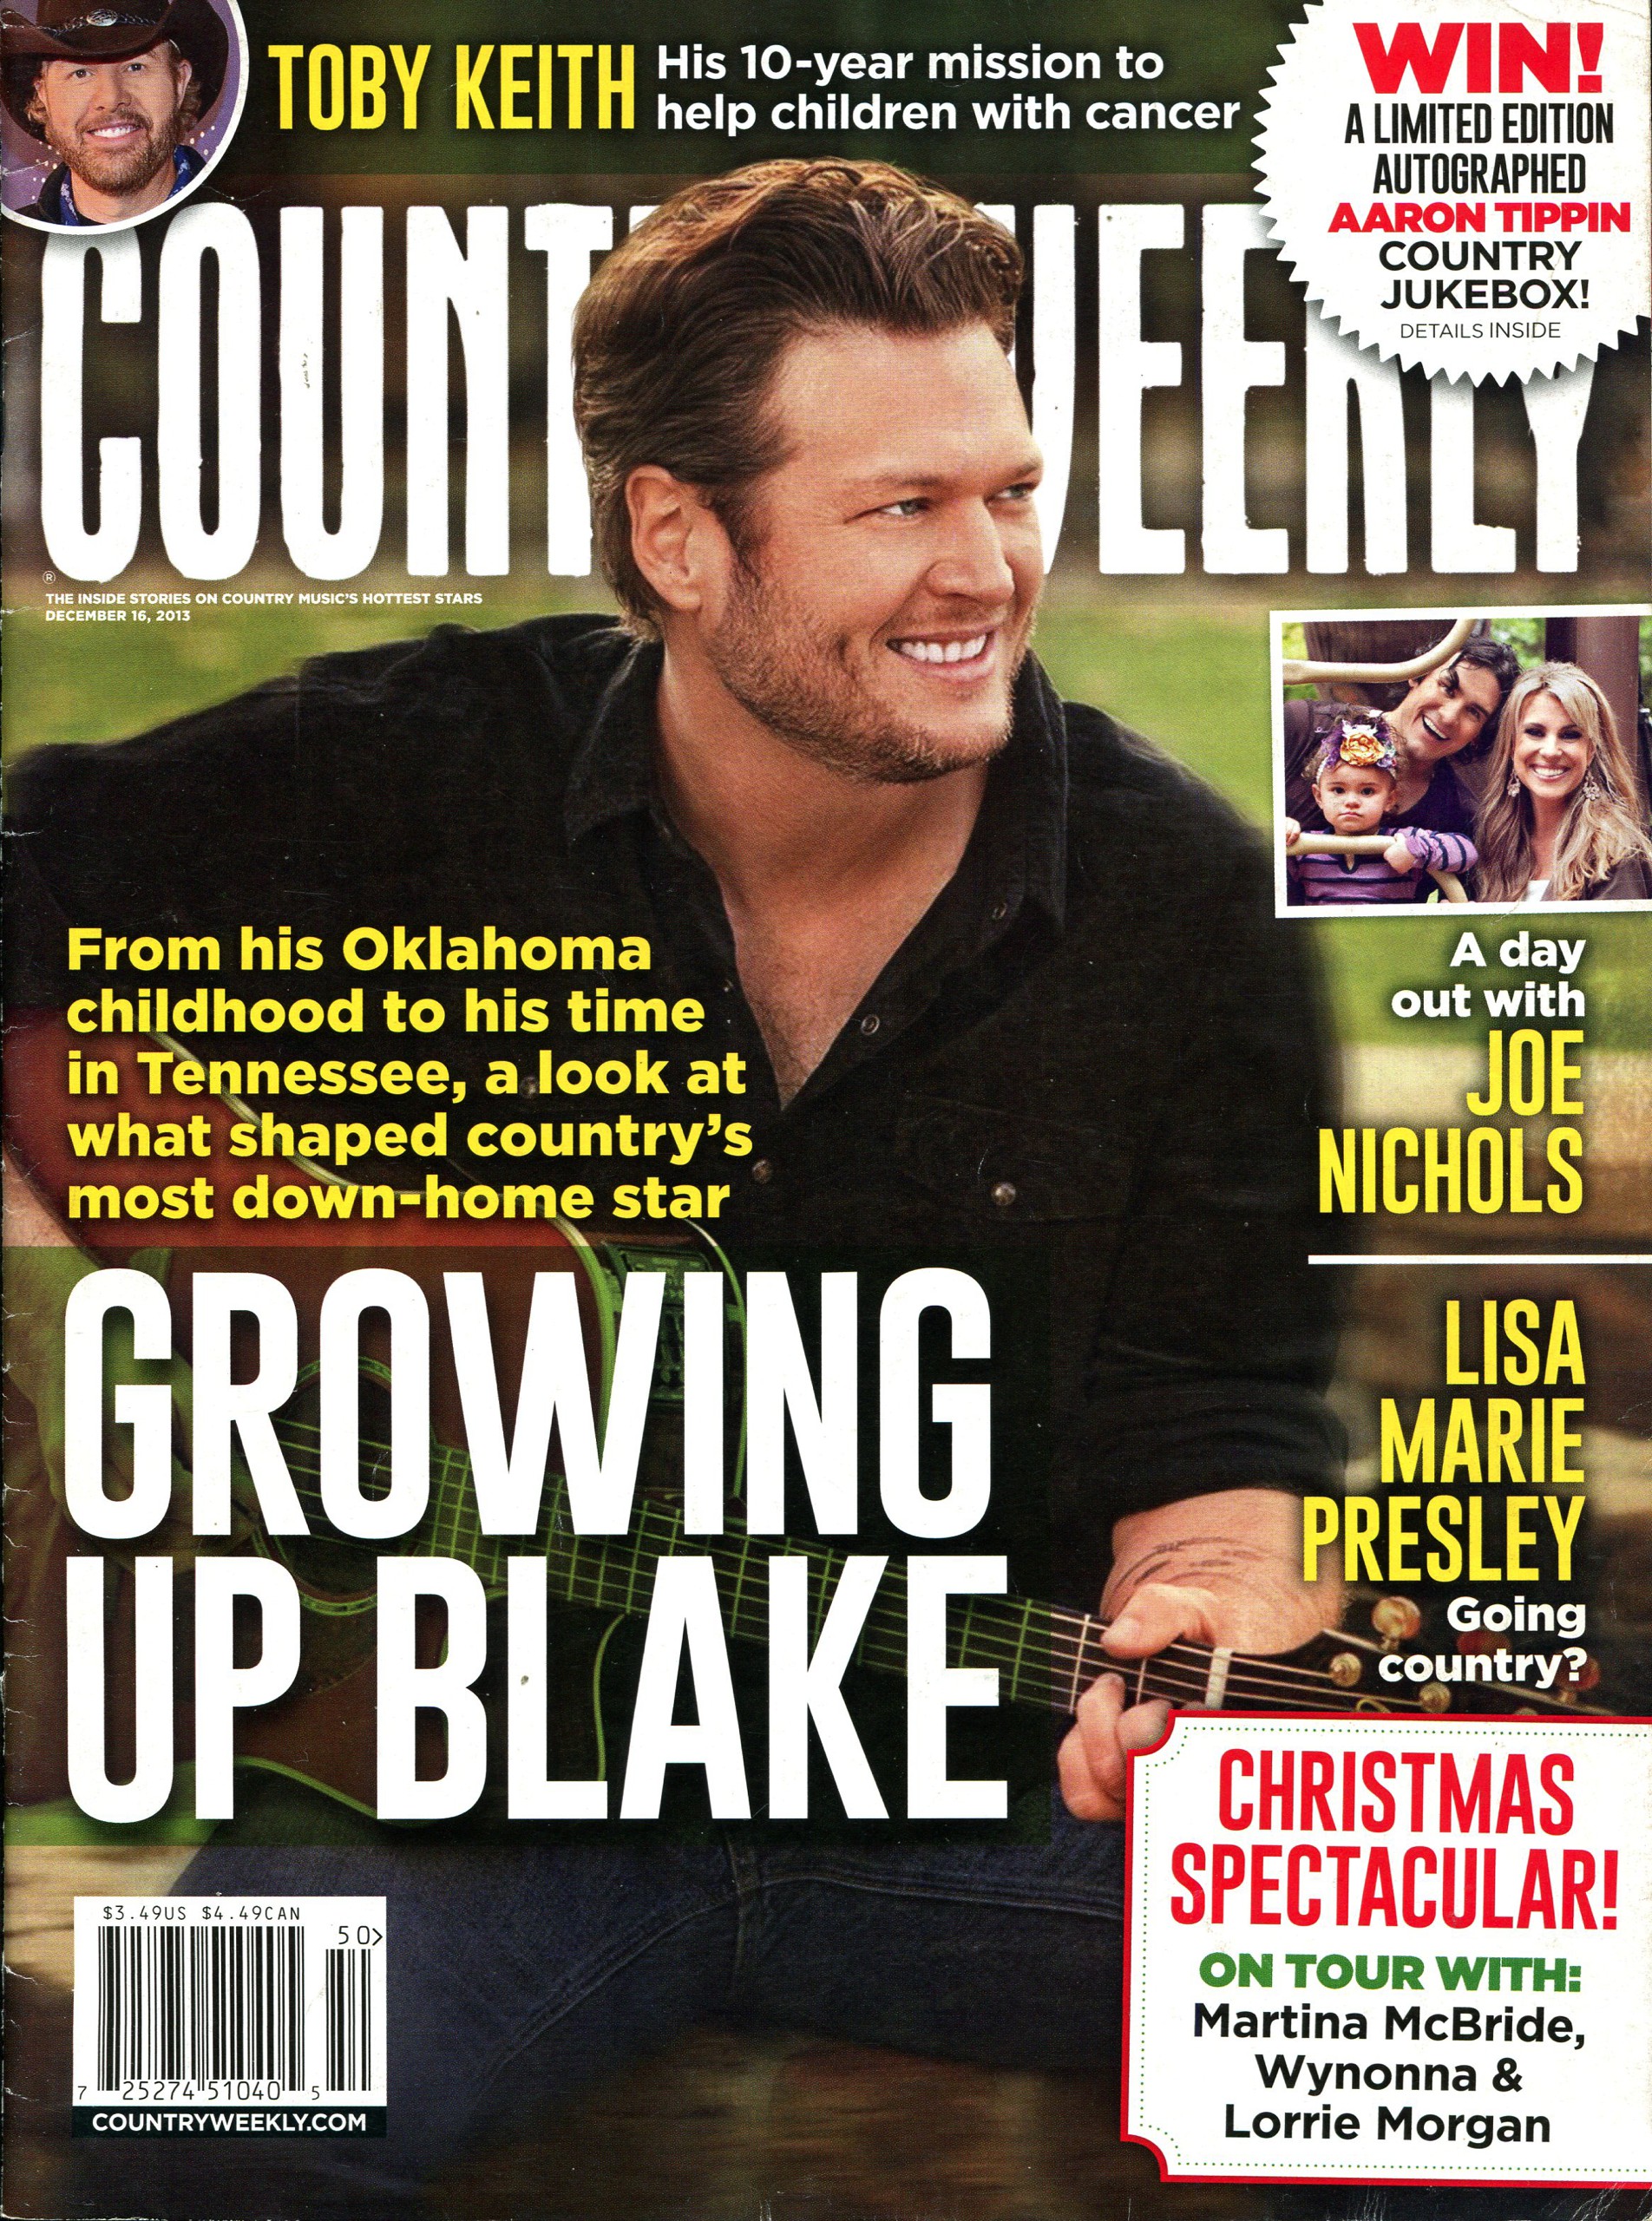 Country Weekly - Dec. 16th 2013